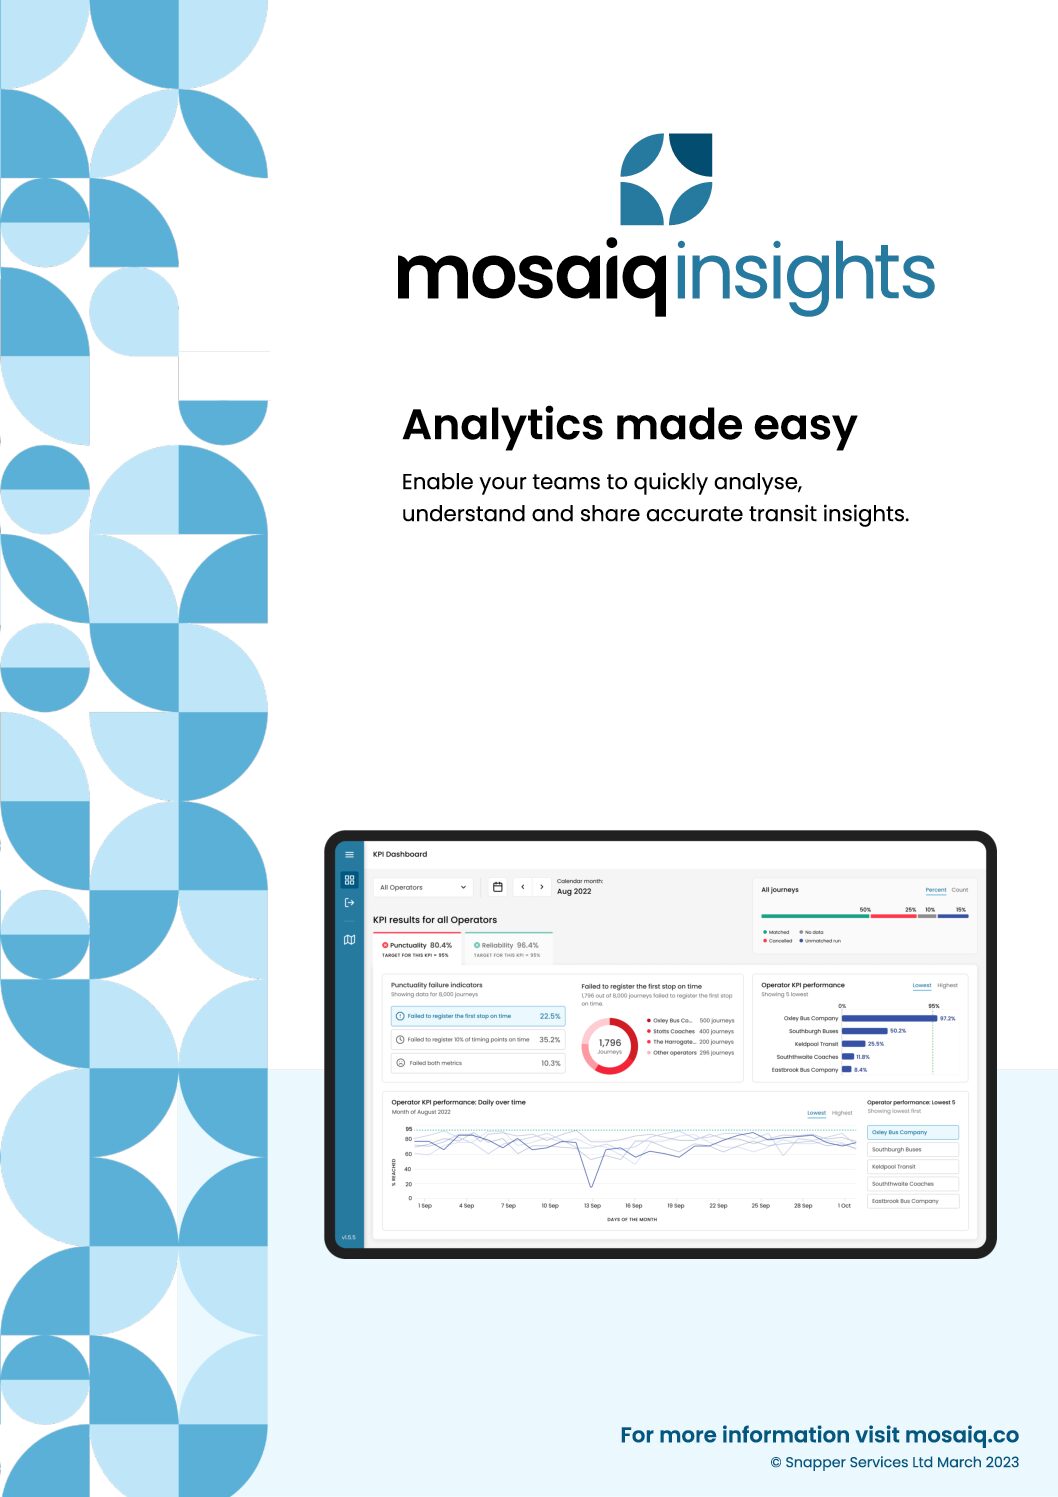 Snapper Services: Mosaiq Insights